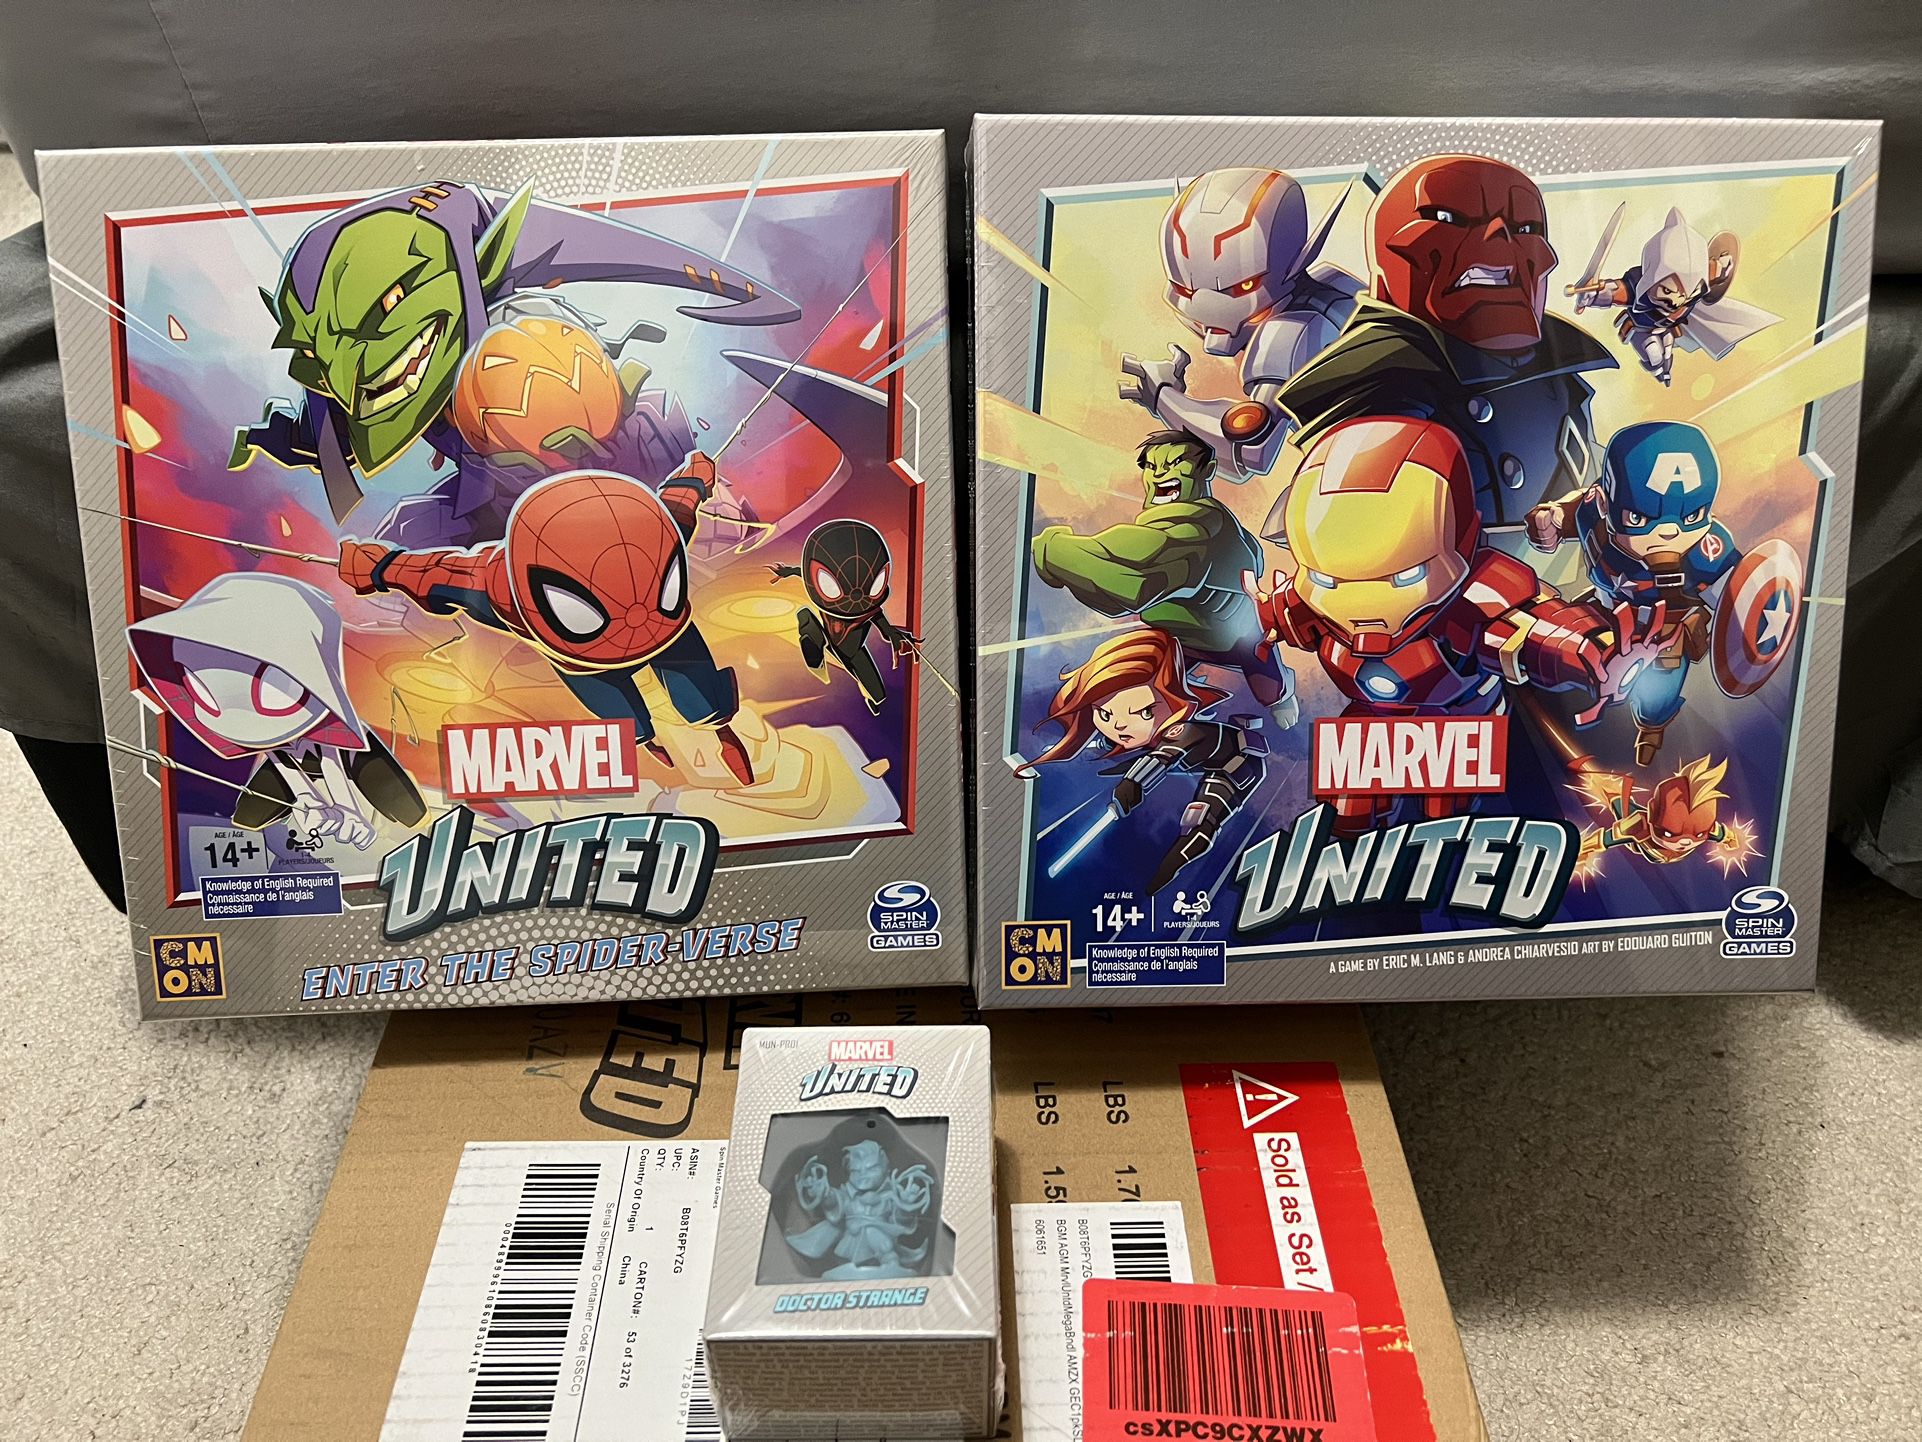 Marvel United, Superhero Card Strategy Board Game Comic Bundle with Spiderman and Dr. Strange Expansion.